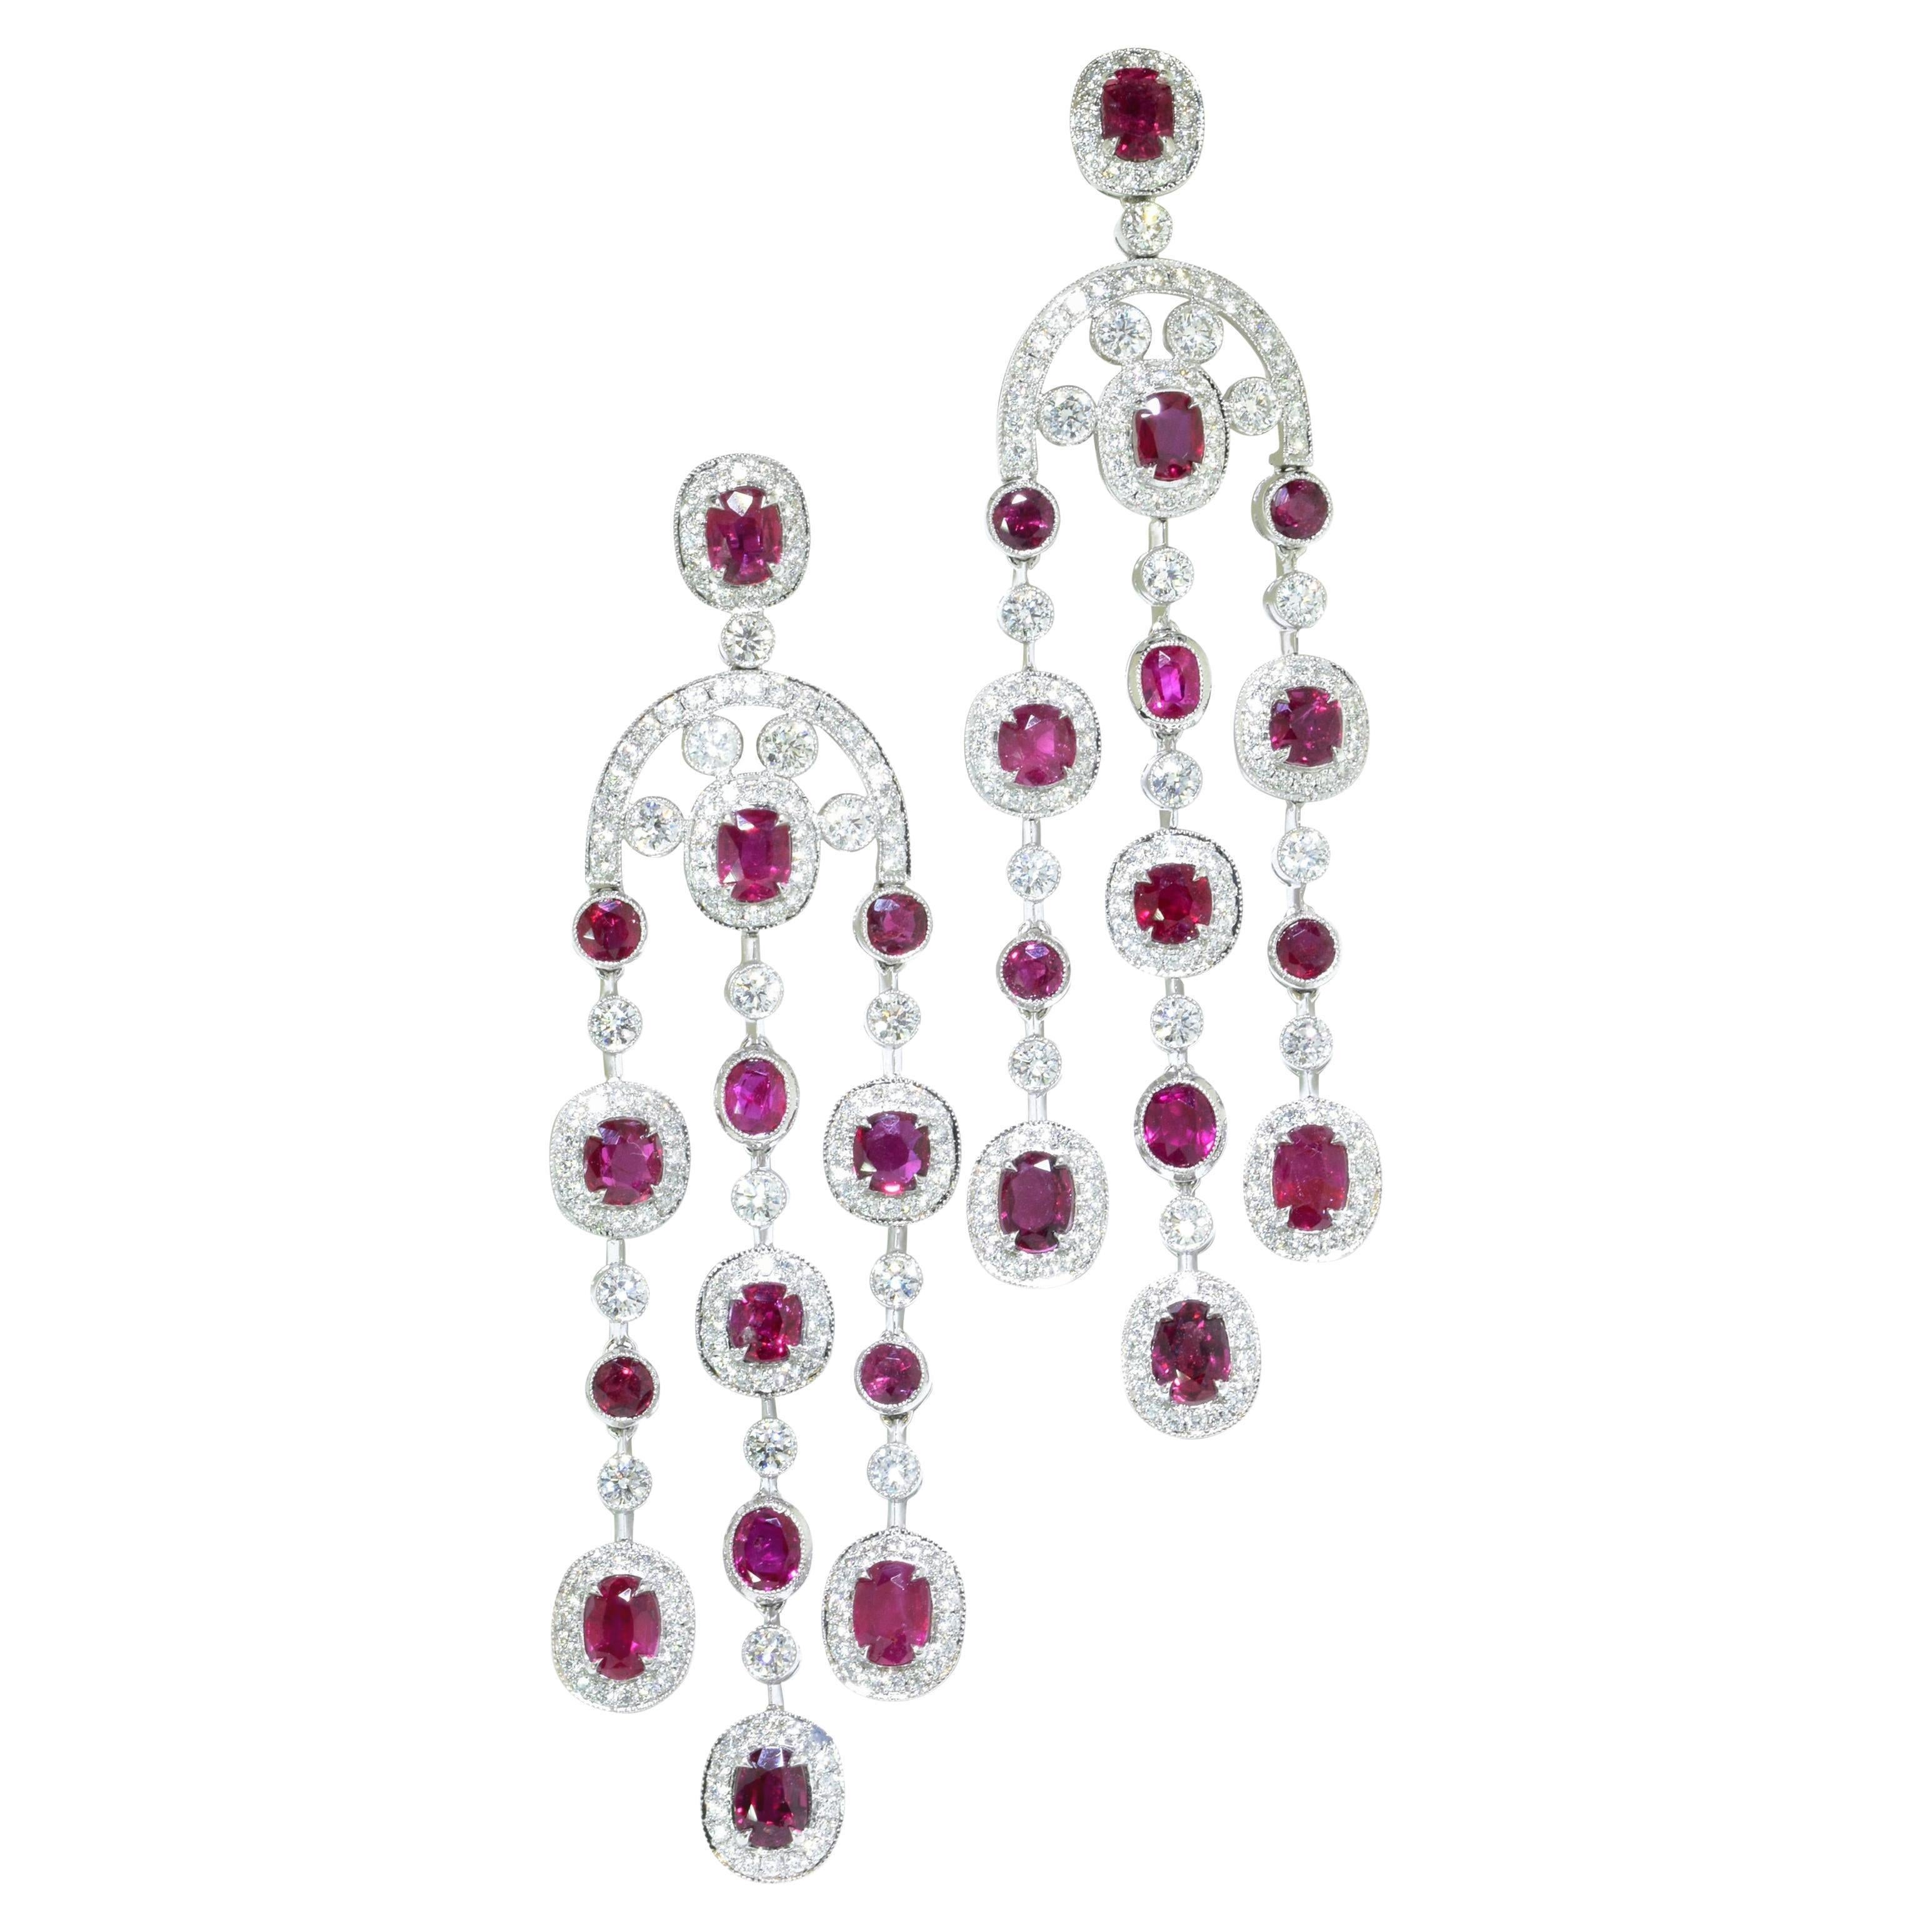 Very Fine GIA Certified unheated Ruby & Diamond Earring by Pierre/Famille For Sale 2